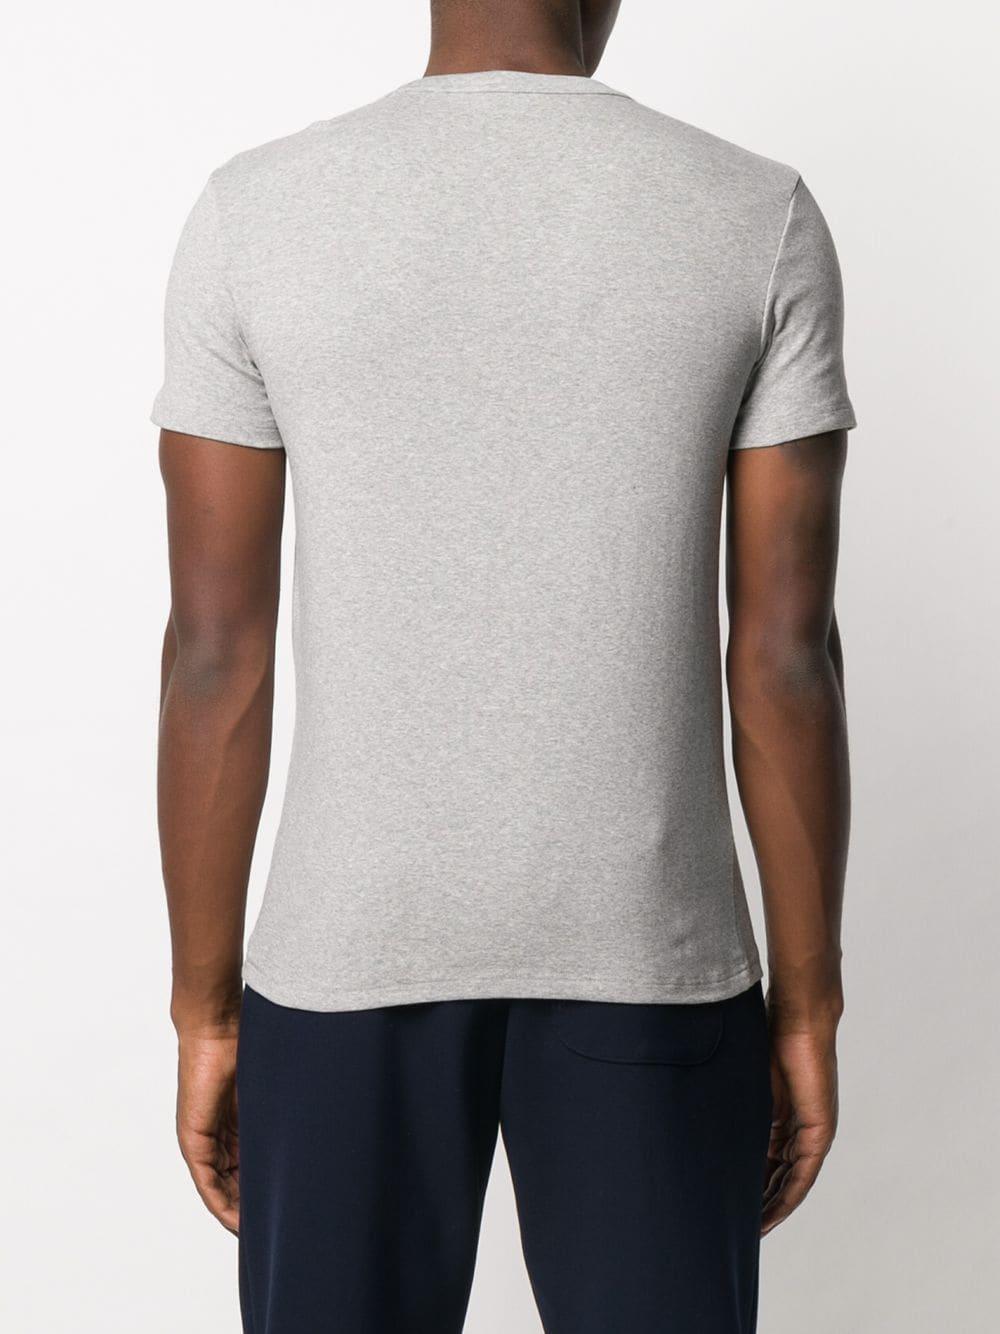 Tom Ford Cotton Logo Patch V-neck T-shirt in Grey (Gray) for Men - Lyst